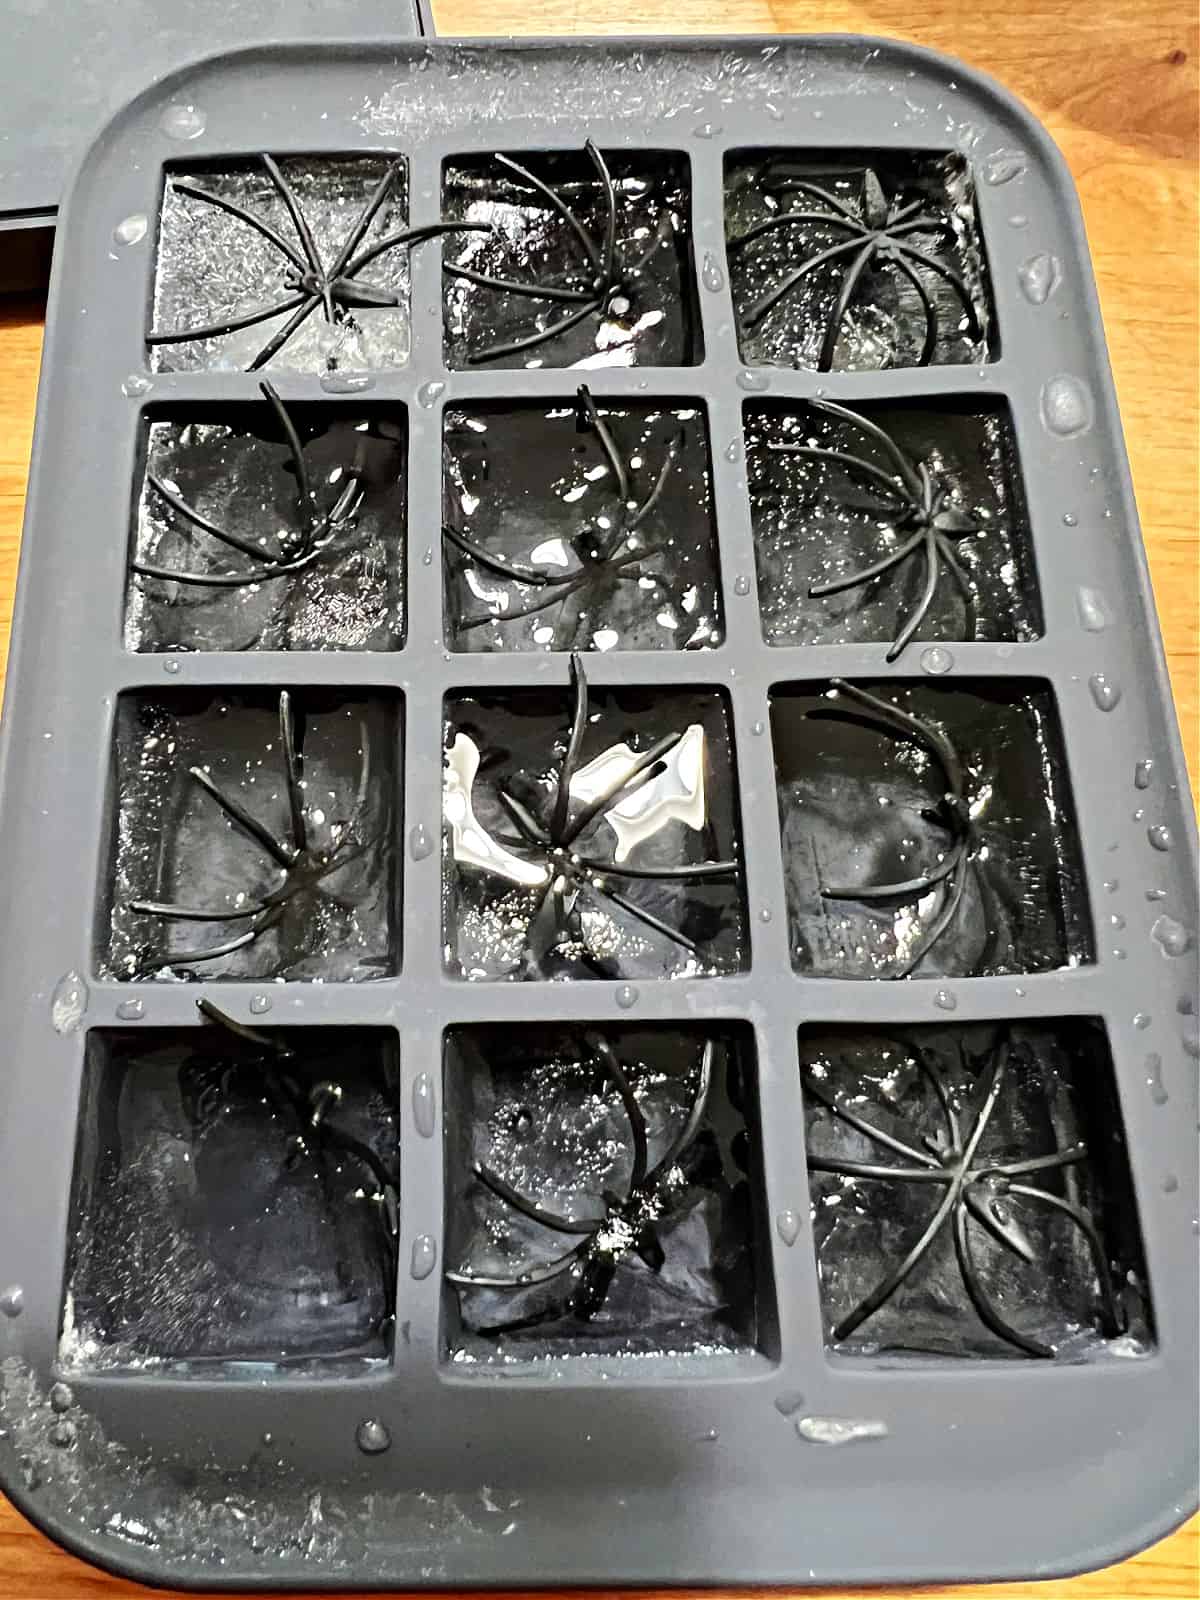 Plastic spiders freezing in the ice in ice cube tray.